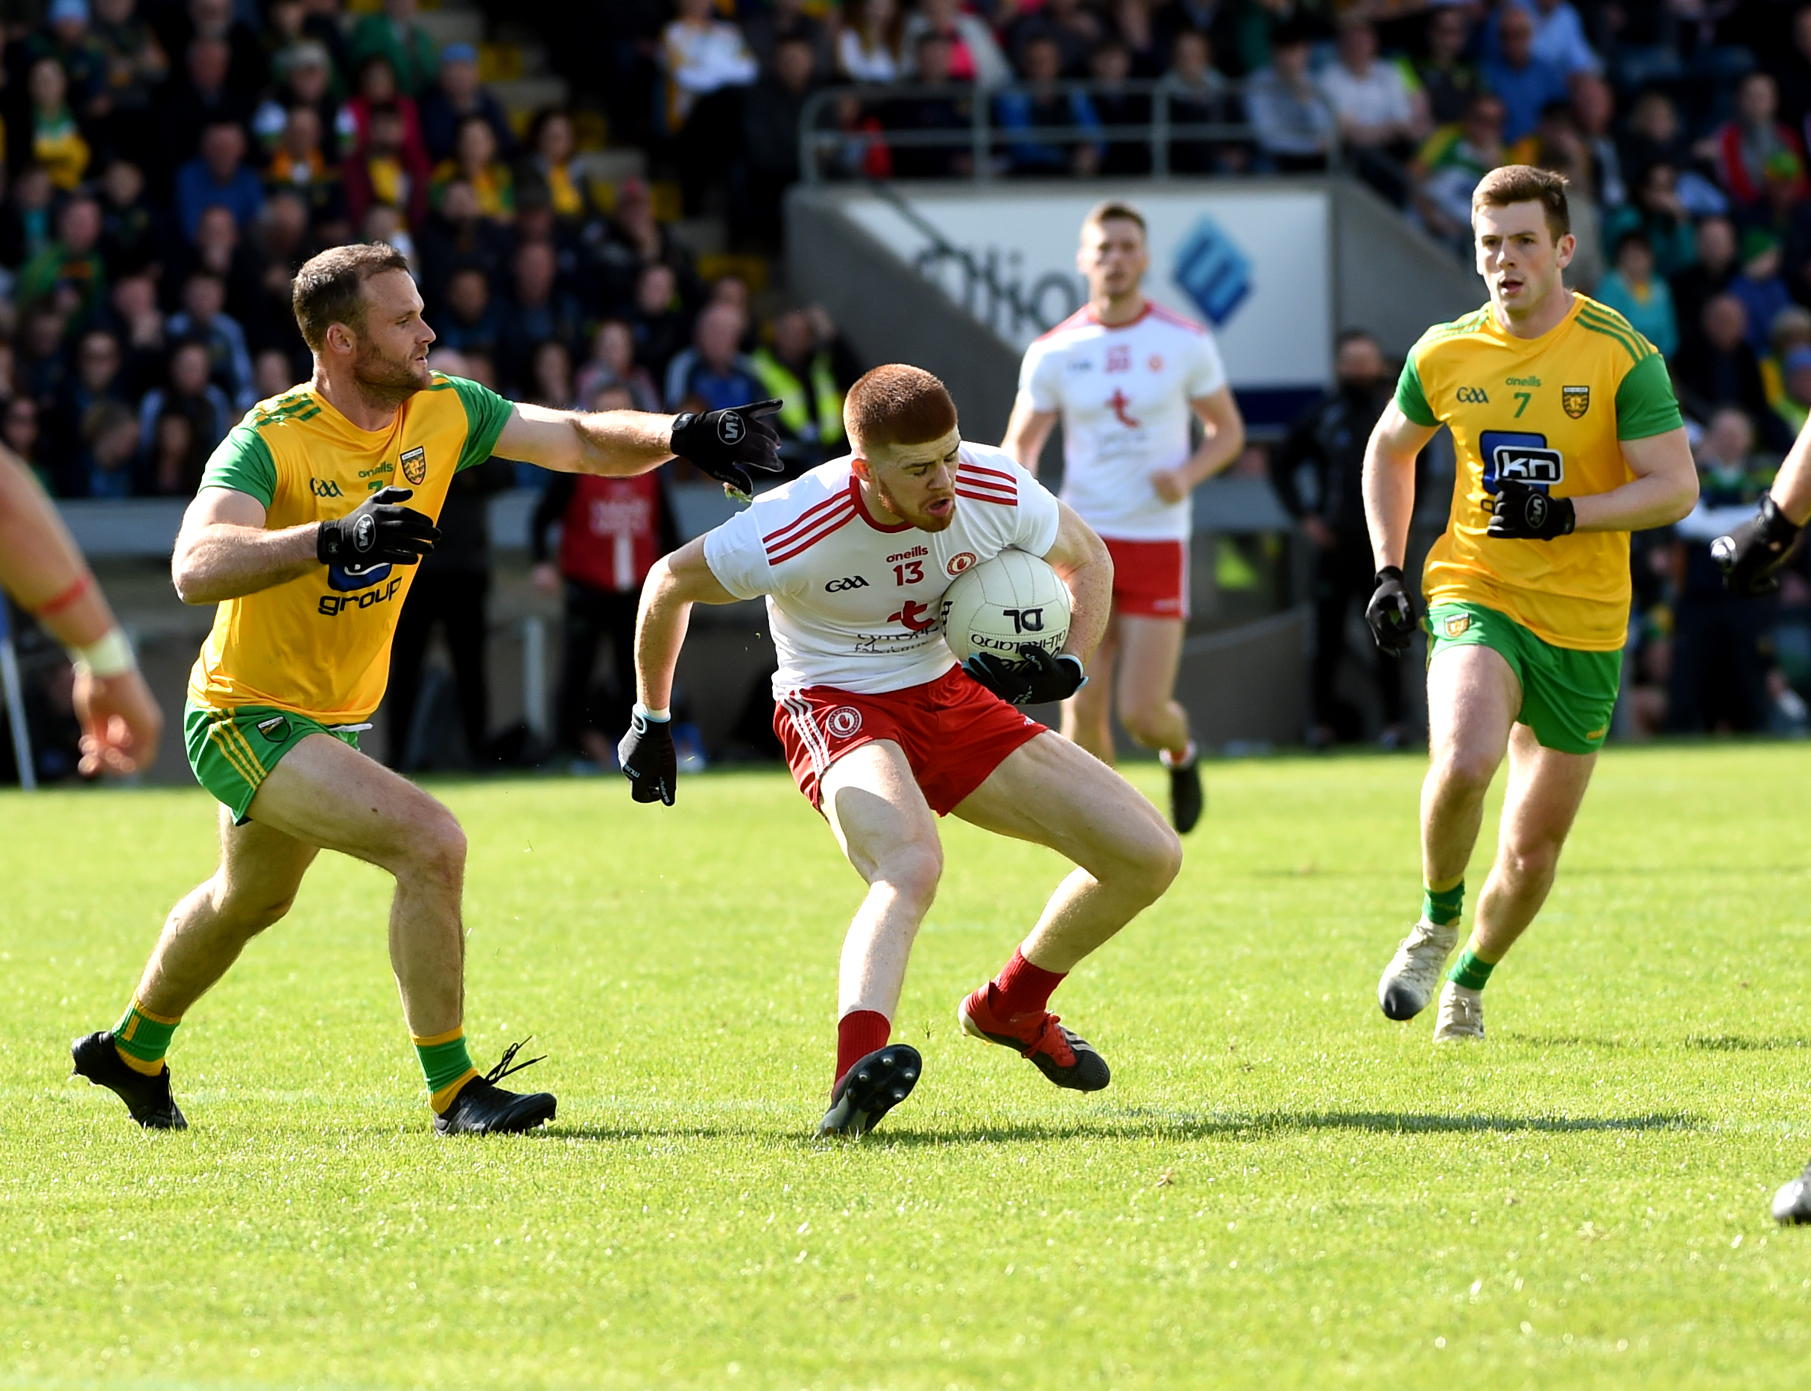 Donegal tie might be moved to neutral venue